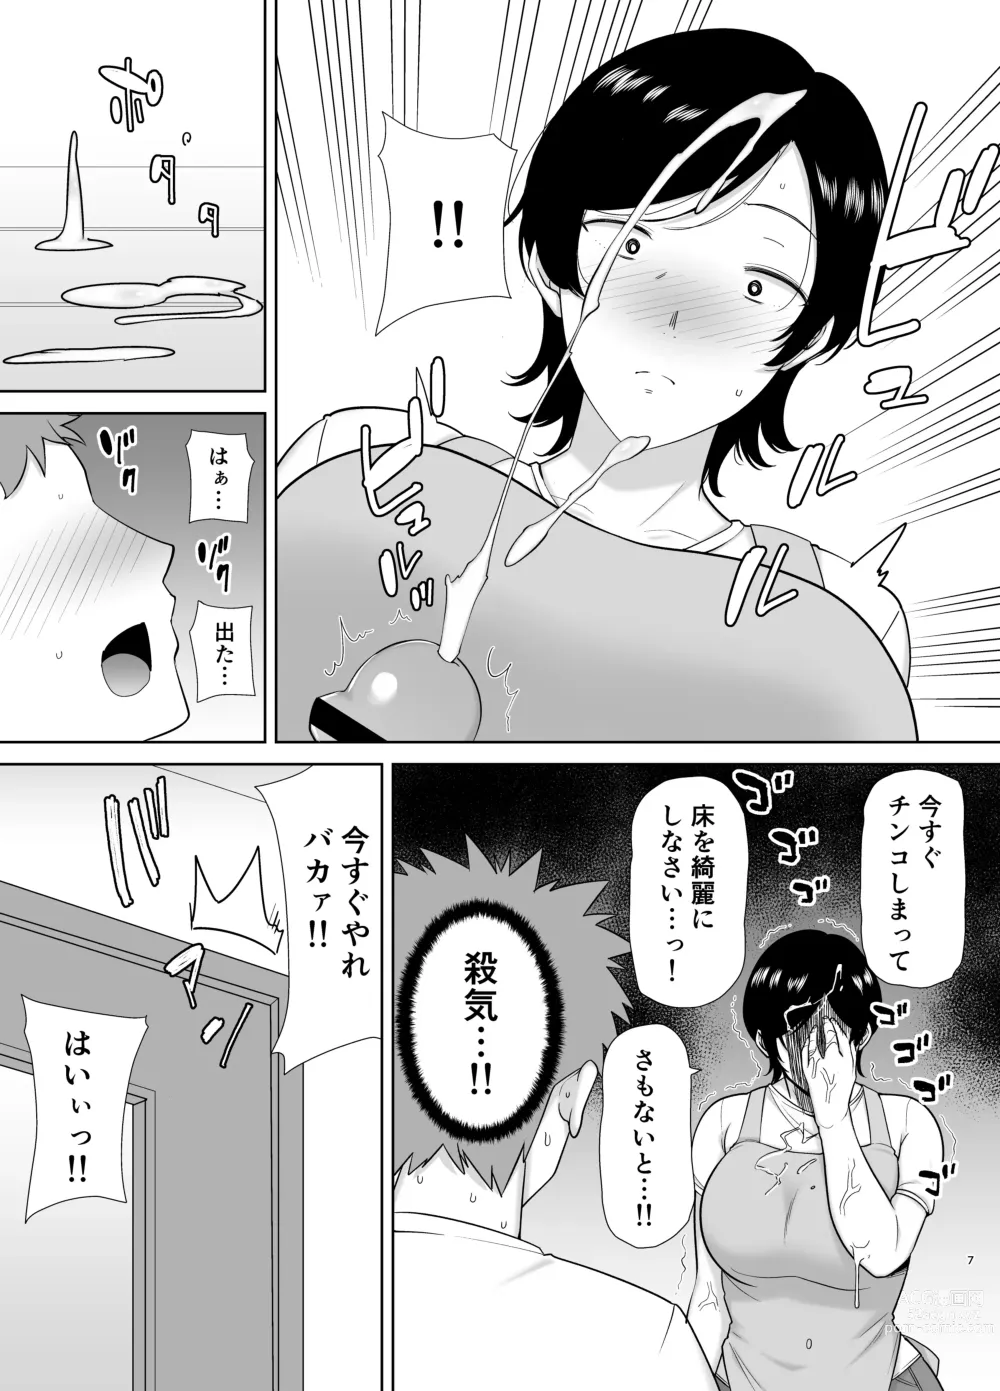 Page 6 of doujinshi 母さんだって女なんだよ！